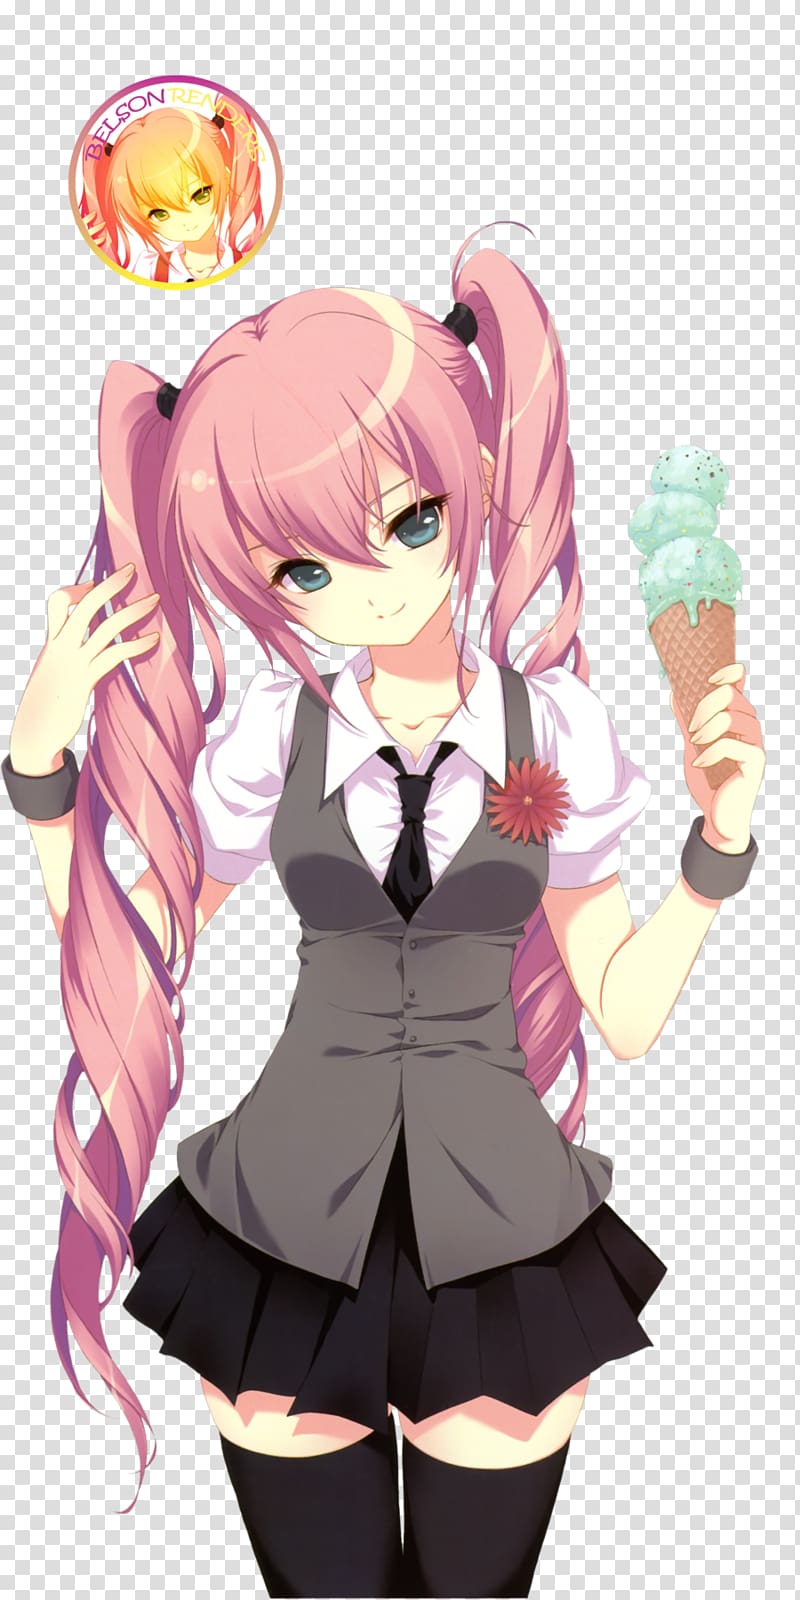 Megurine Luka Vocaloid Just Be Friends Rendering, manga transparent background PNG clipart